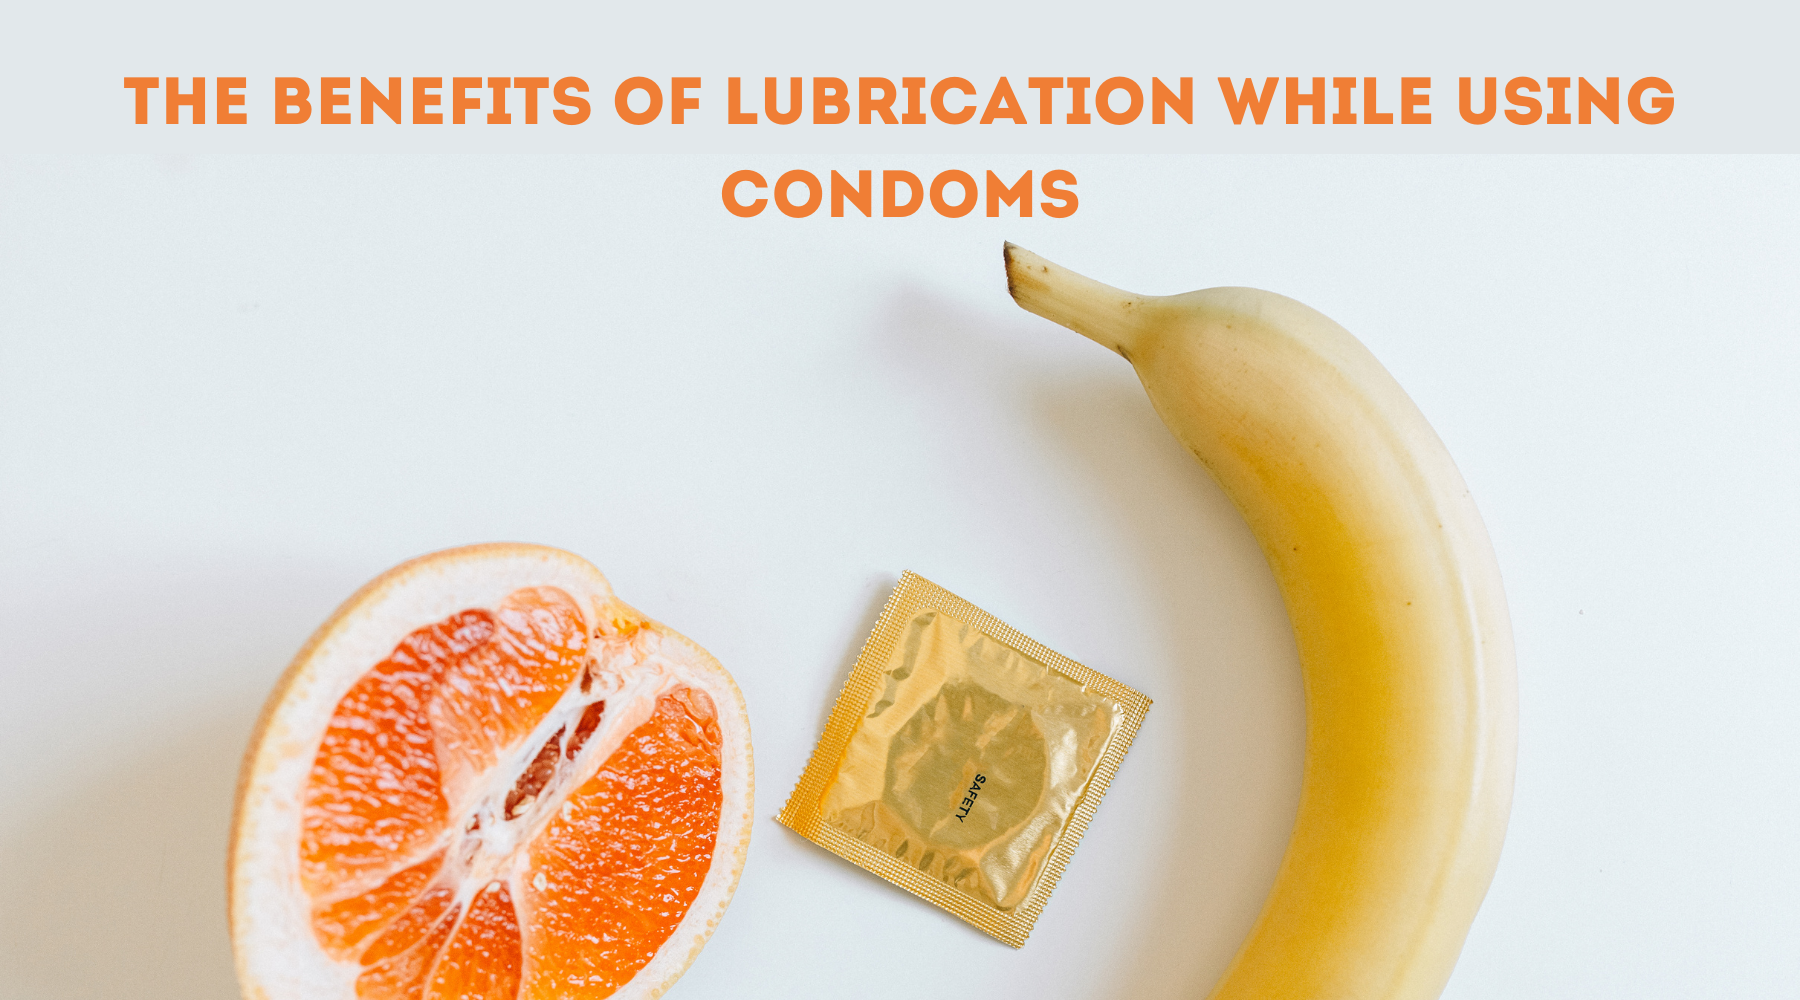 THE BENEFITS OF LUBRICATION WHILE USING CONDOMS